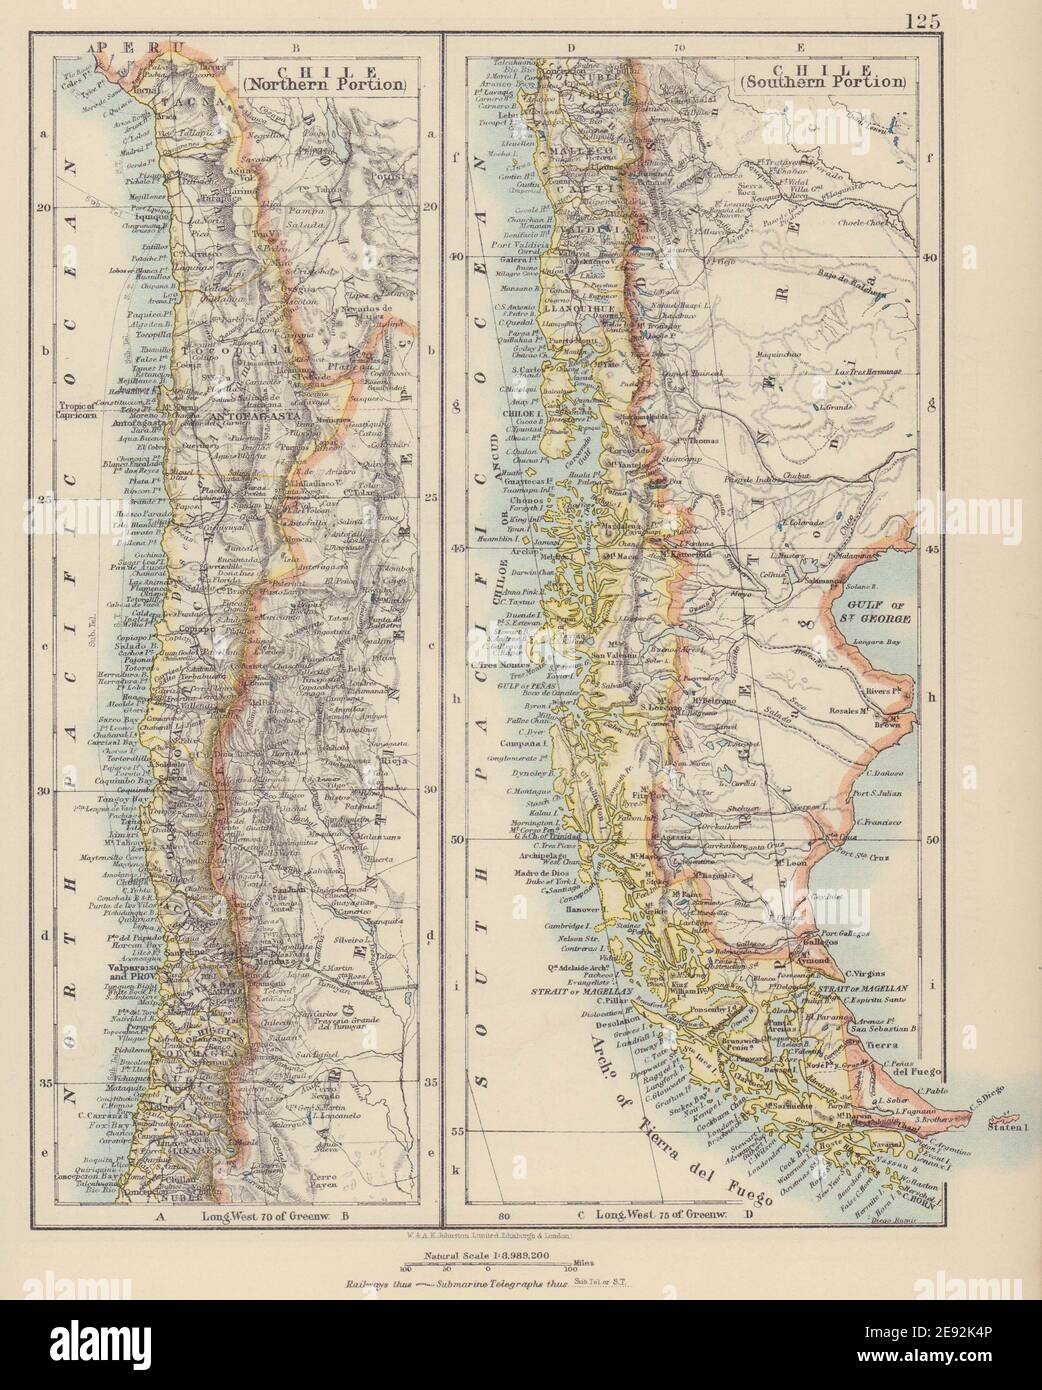 CHILE. Patagonia Cape Horn Tierra del Fuego. Steamship routes. JOHNSTON 1910 map Stock Photo